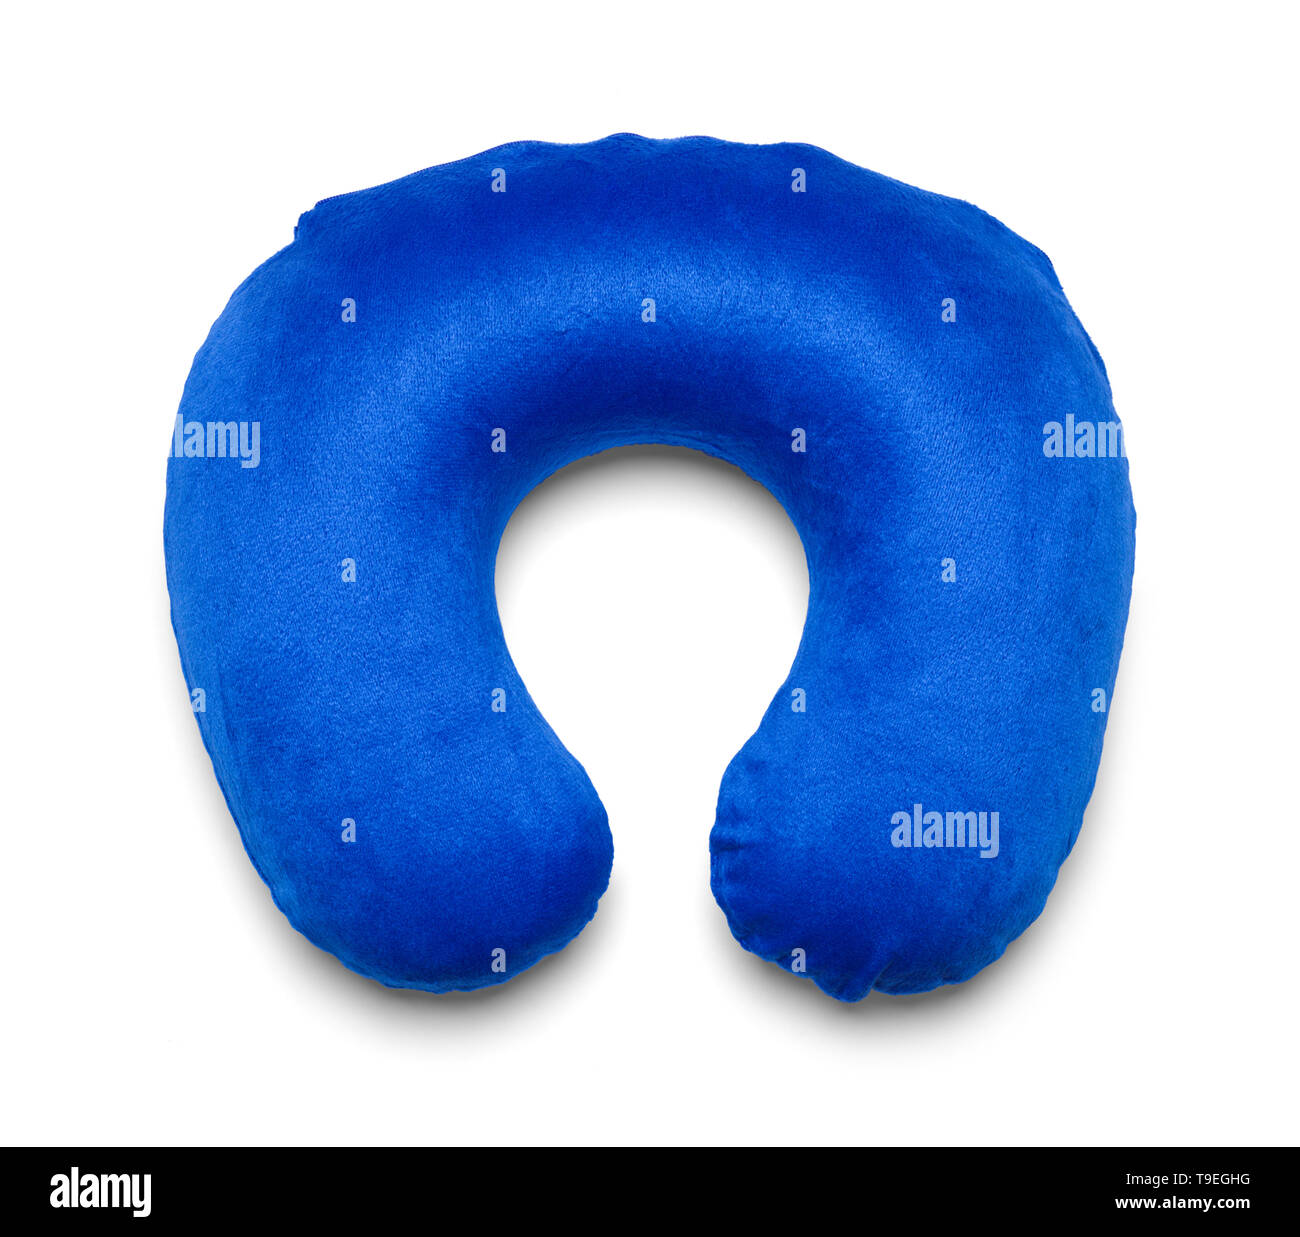 Blue Blow Up Neck Pillow Isolated on White Background. Stock Photo